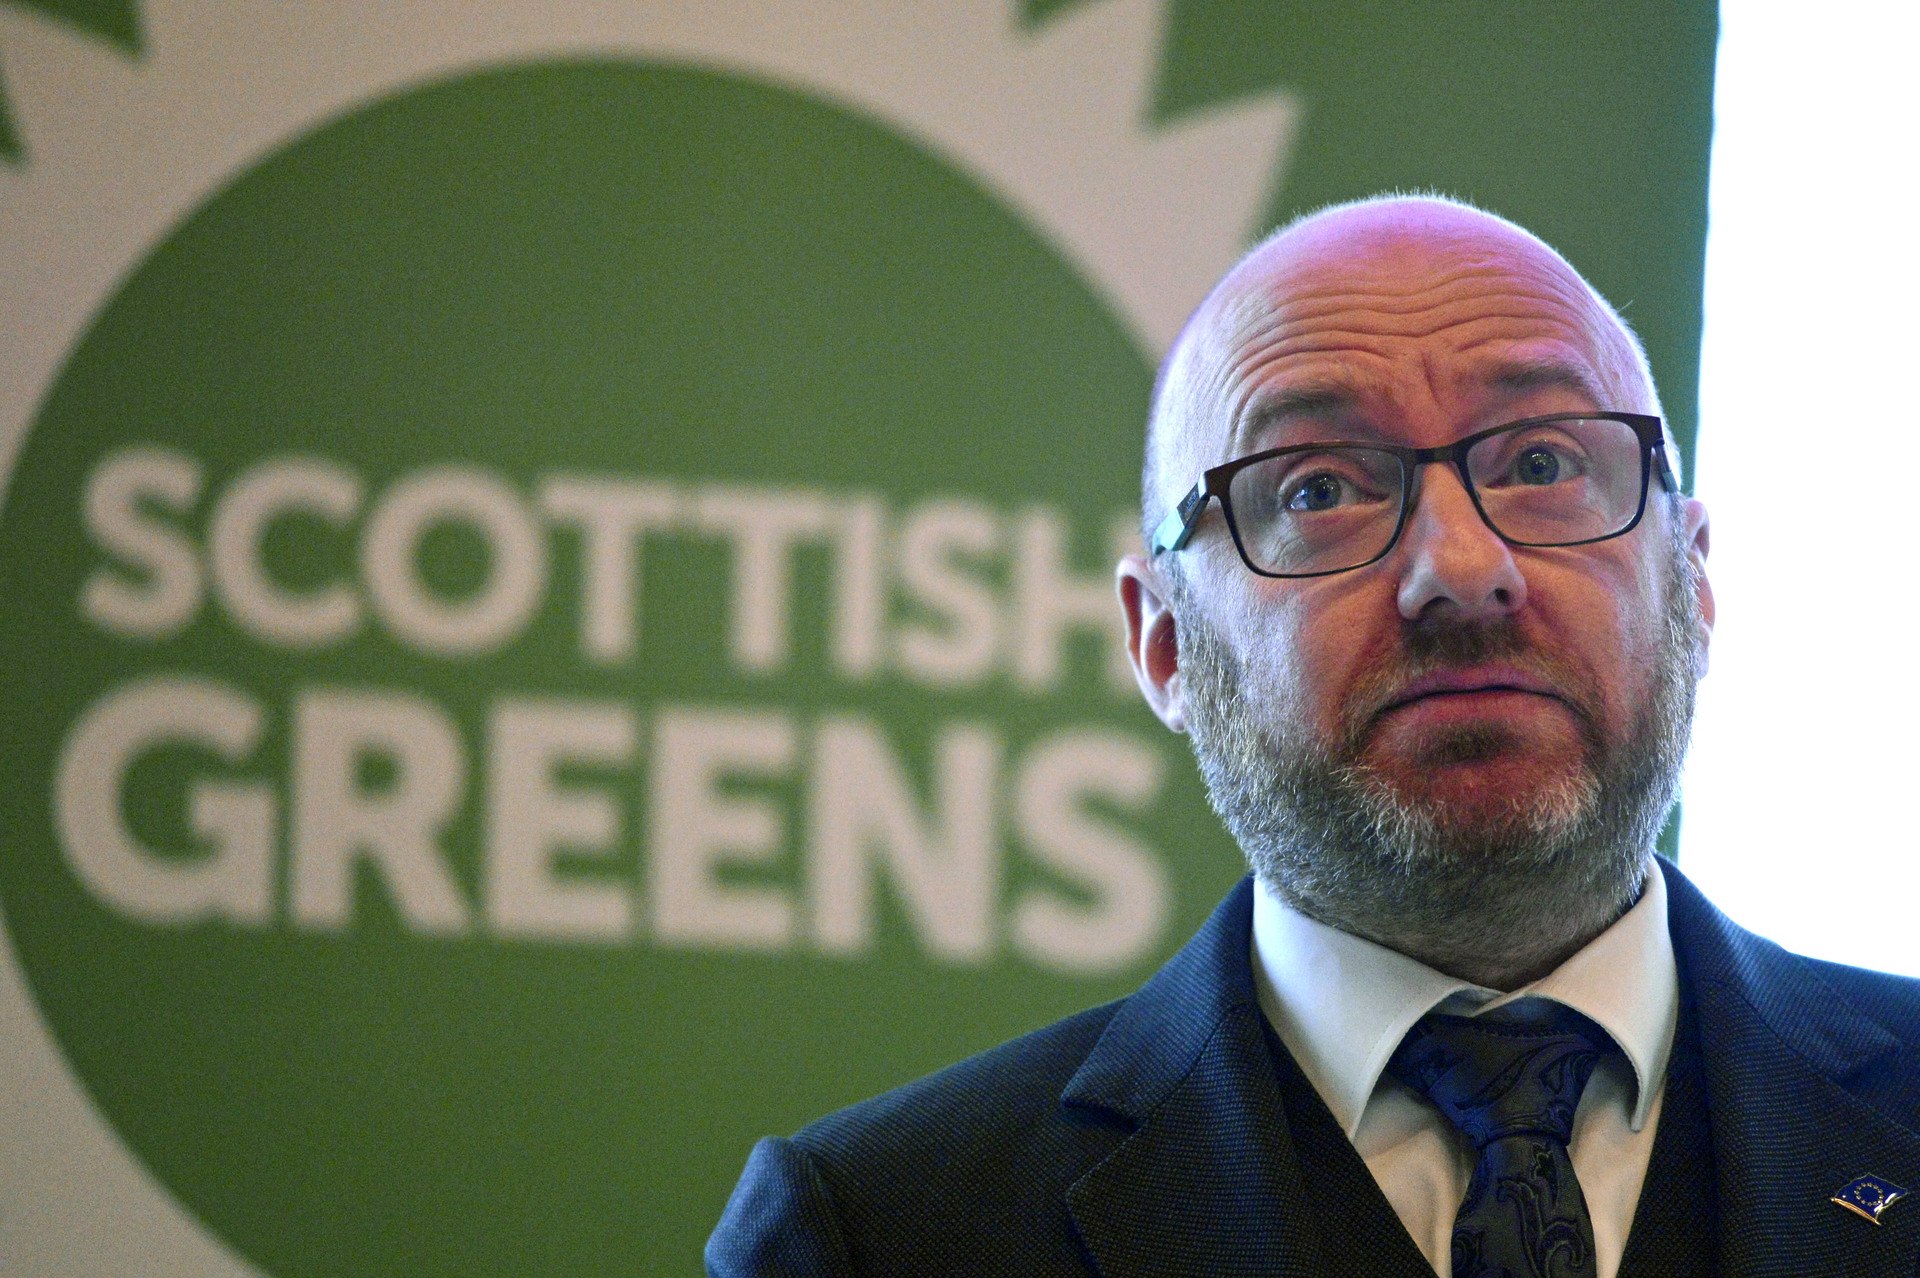 Scottish Greens co-leader Patrick Harvie signalled support for John Swinney - but said it would be conditional.